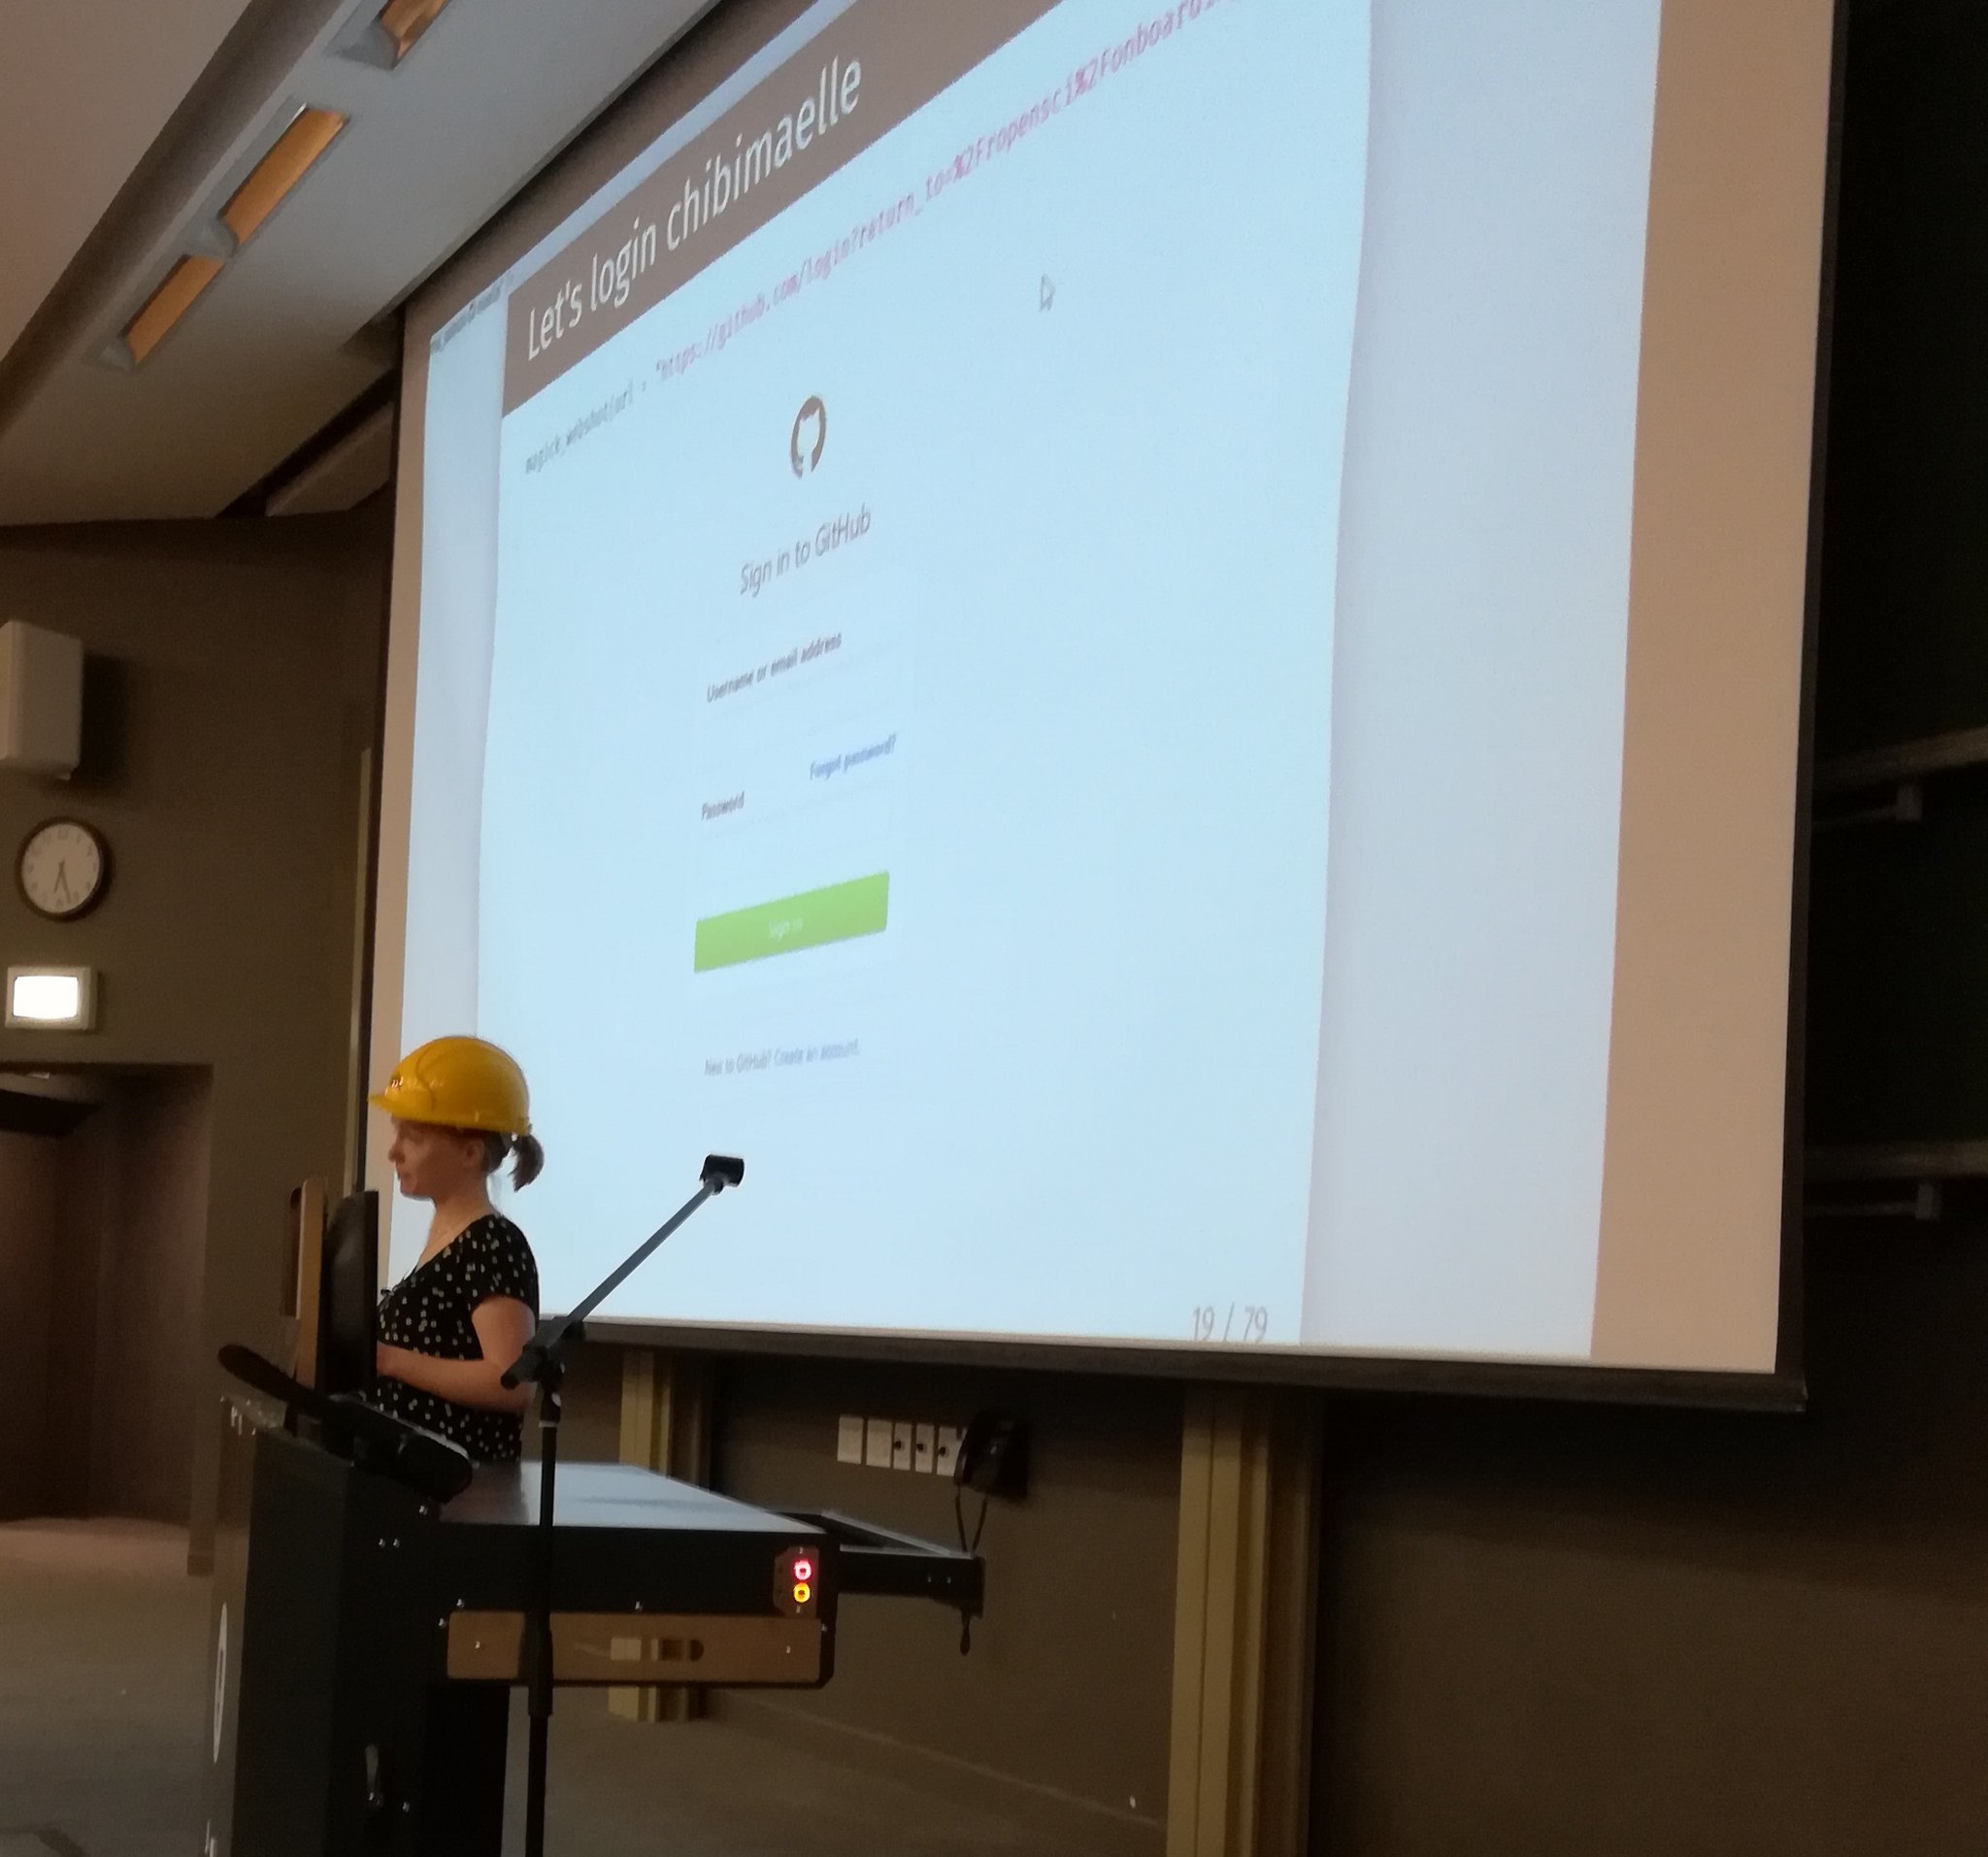 Maëlle giving a presentation while wearing a hard hat